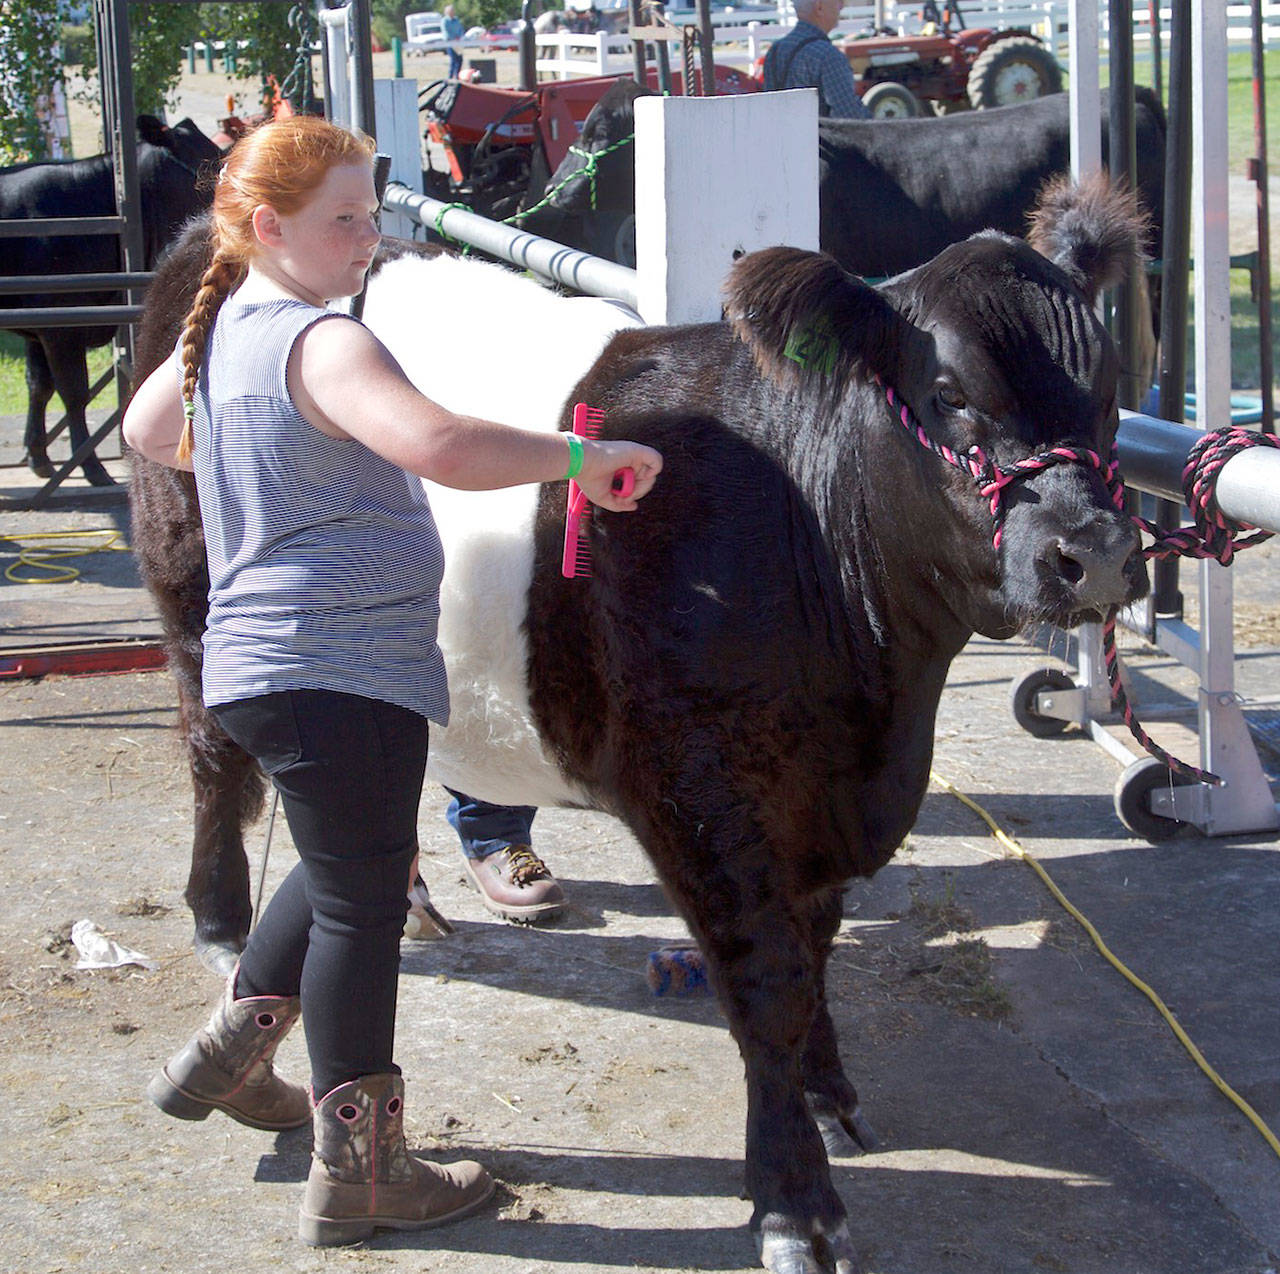 Joanna Seeley, 10, of Sequim grooms her 18-month-old steer, Joey, for later judging in the Jefferson County Fair at the Jefferson County Fairgrounds in Port Townsend last year. (Steve Mullensky/for Peninsula Daily News)